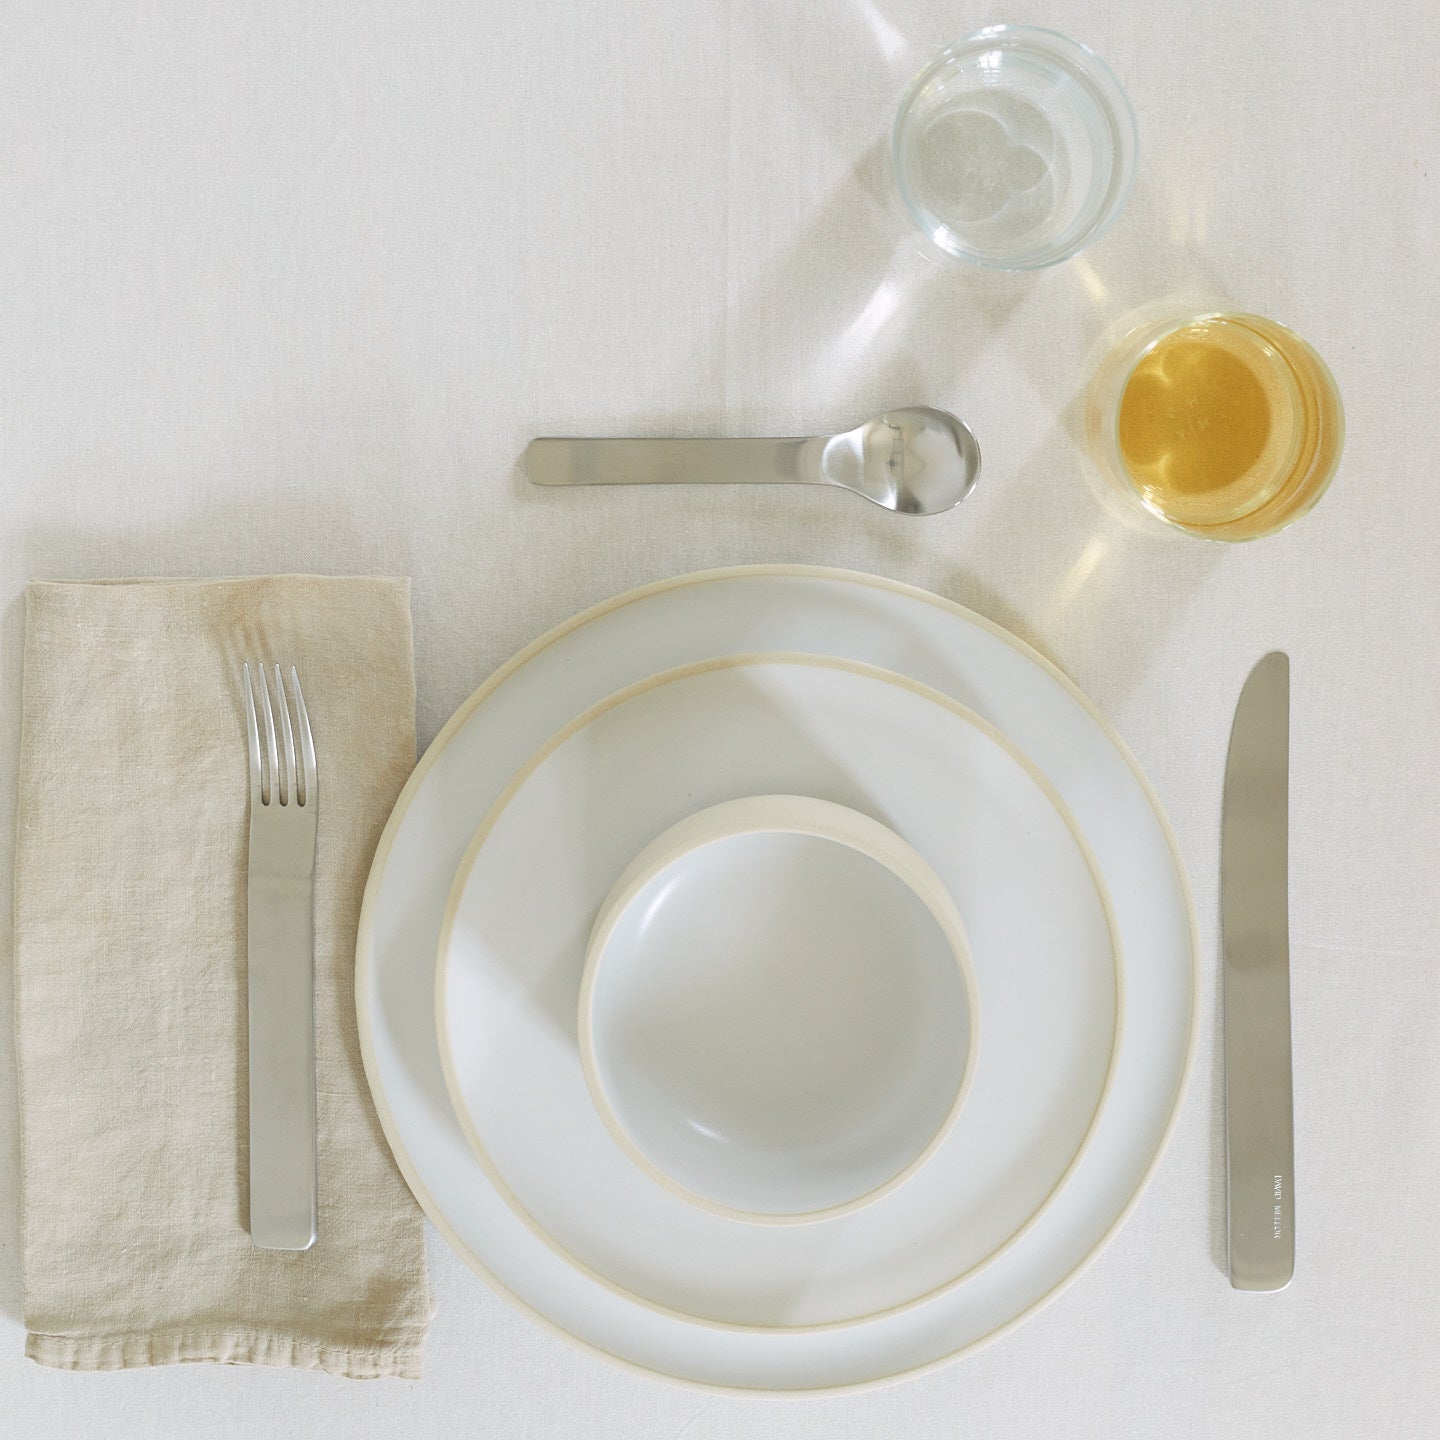 Placesetting with Modernist Salad Plate on ivory striped tablecloth.